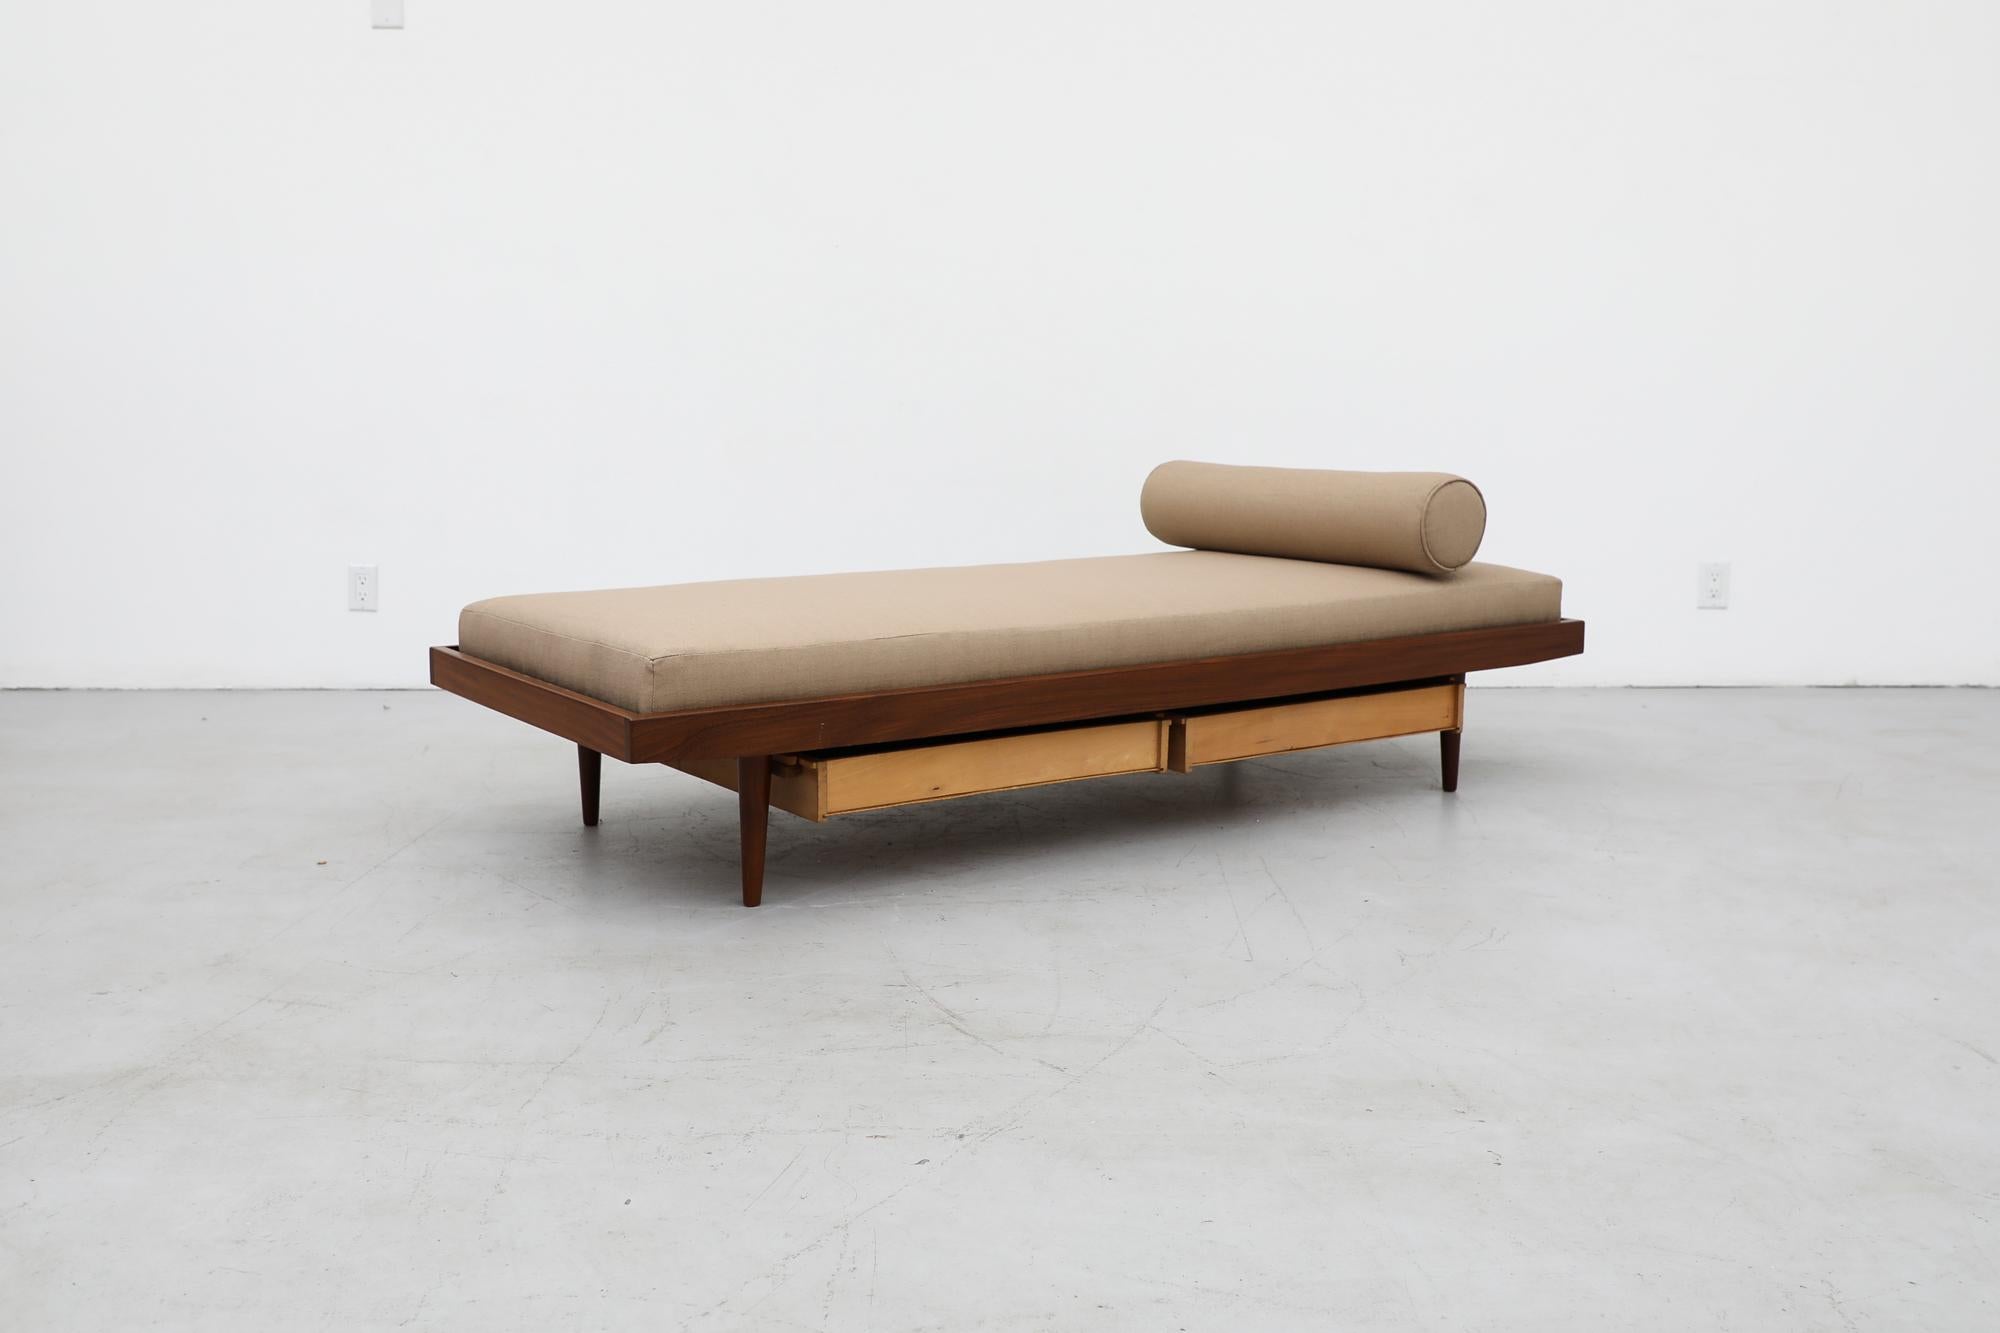 Midcentury Pierre Chapo Inspired Teak Daybed with Storage Drawers 2